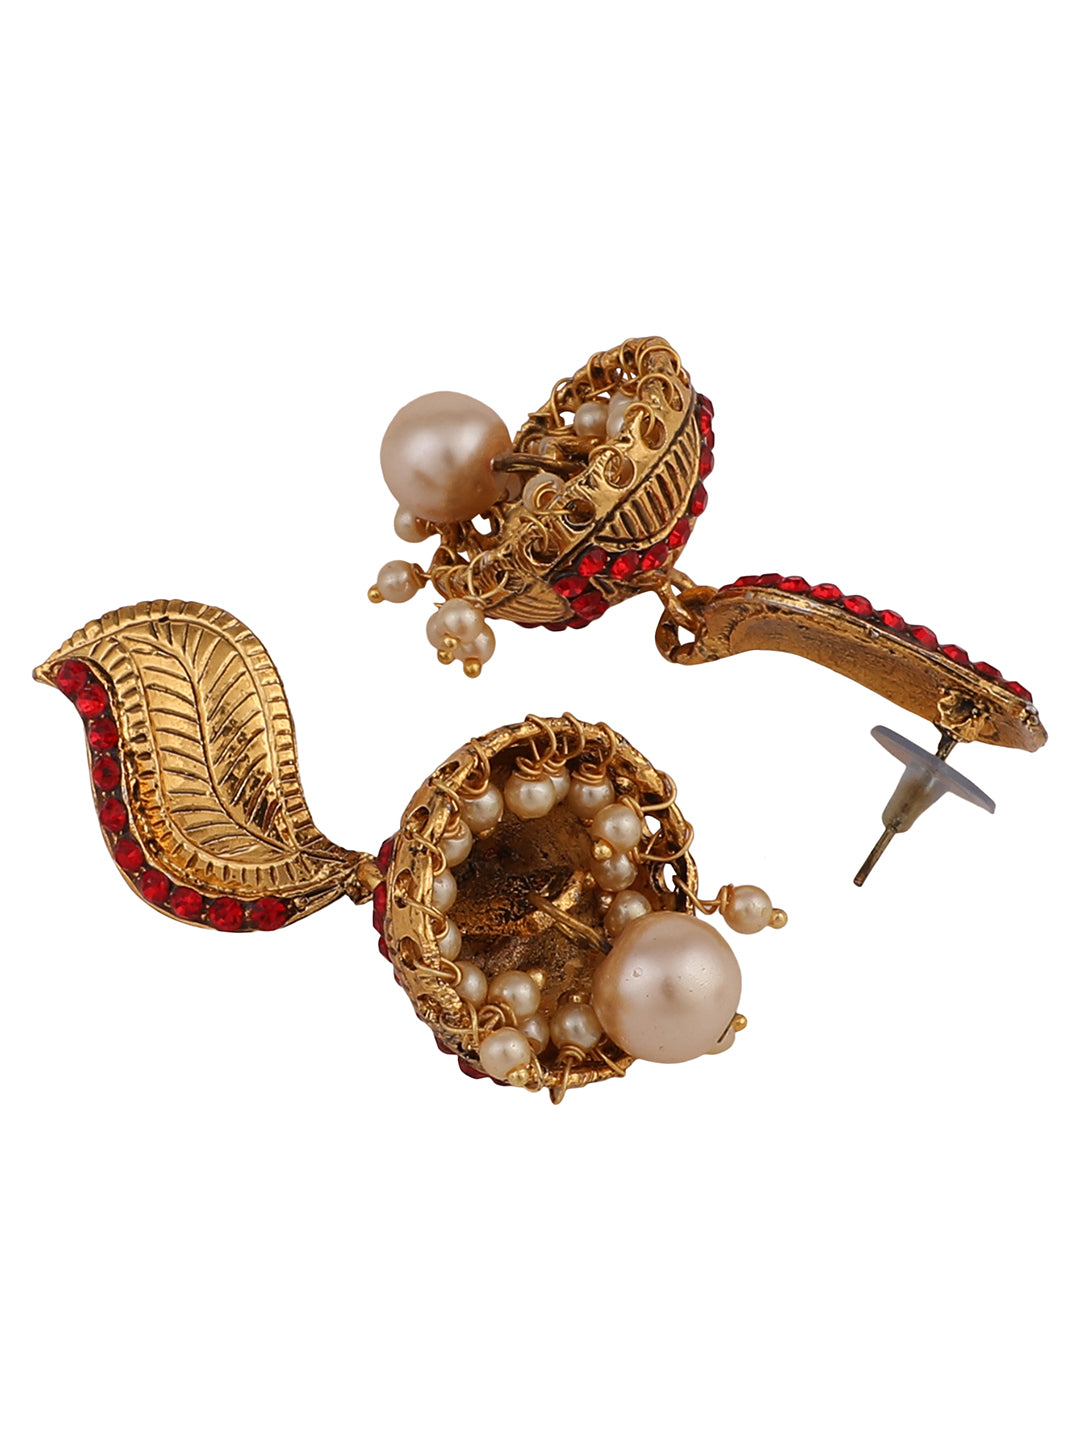 Women's Gold-Toned & Red Stone Studded & Beaded Dome Shaped Jhumkas Earrings - Anikas Creation